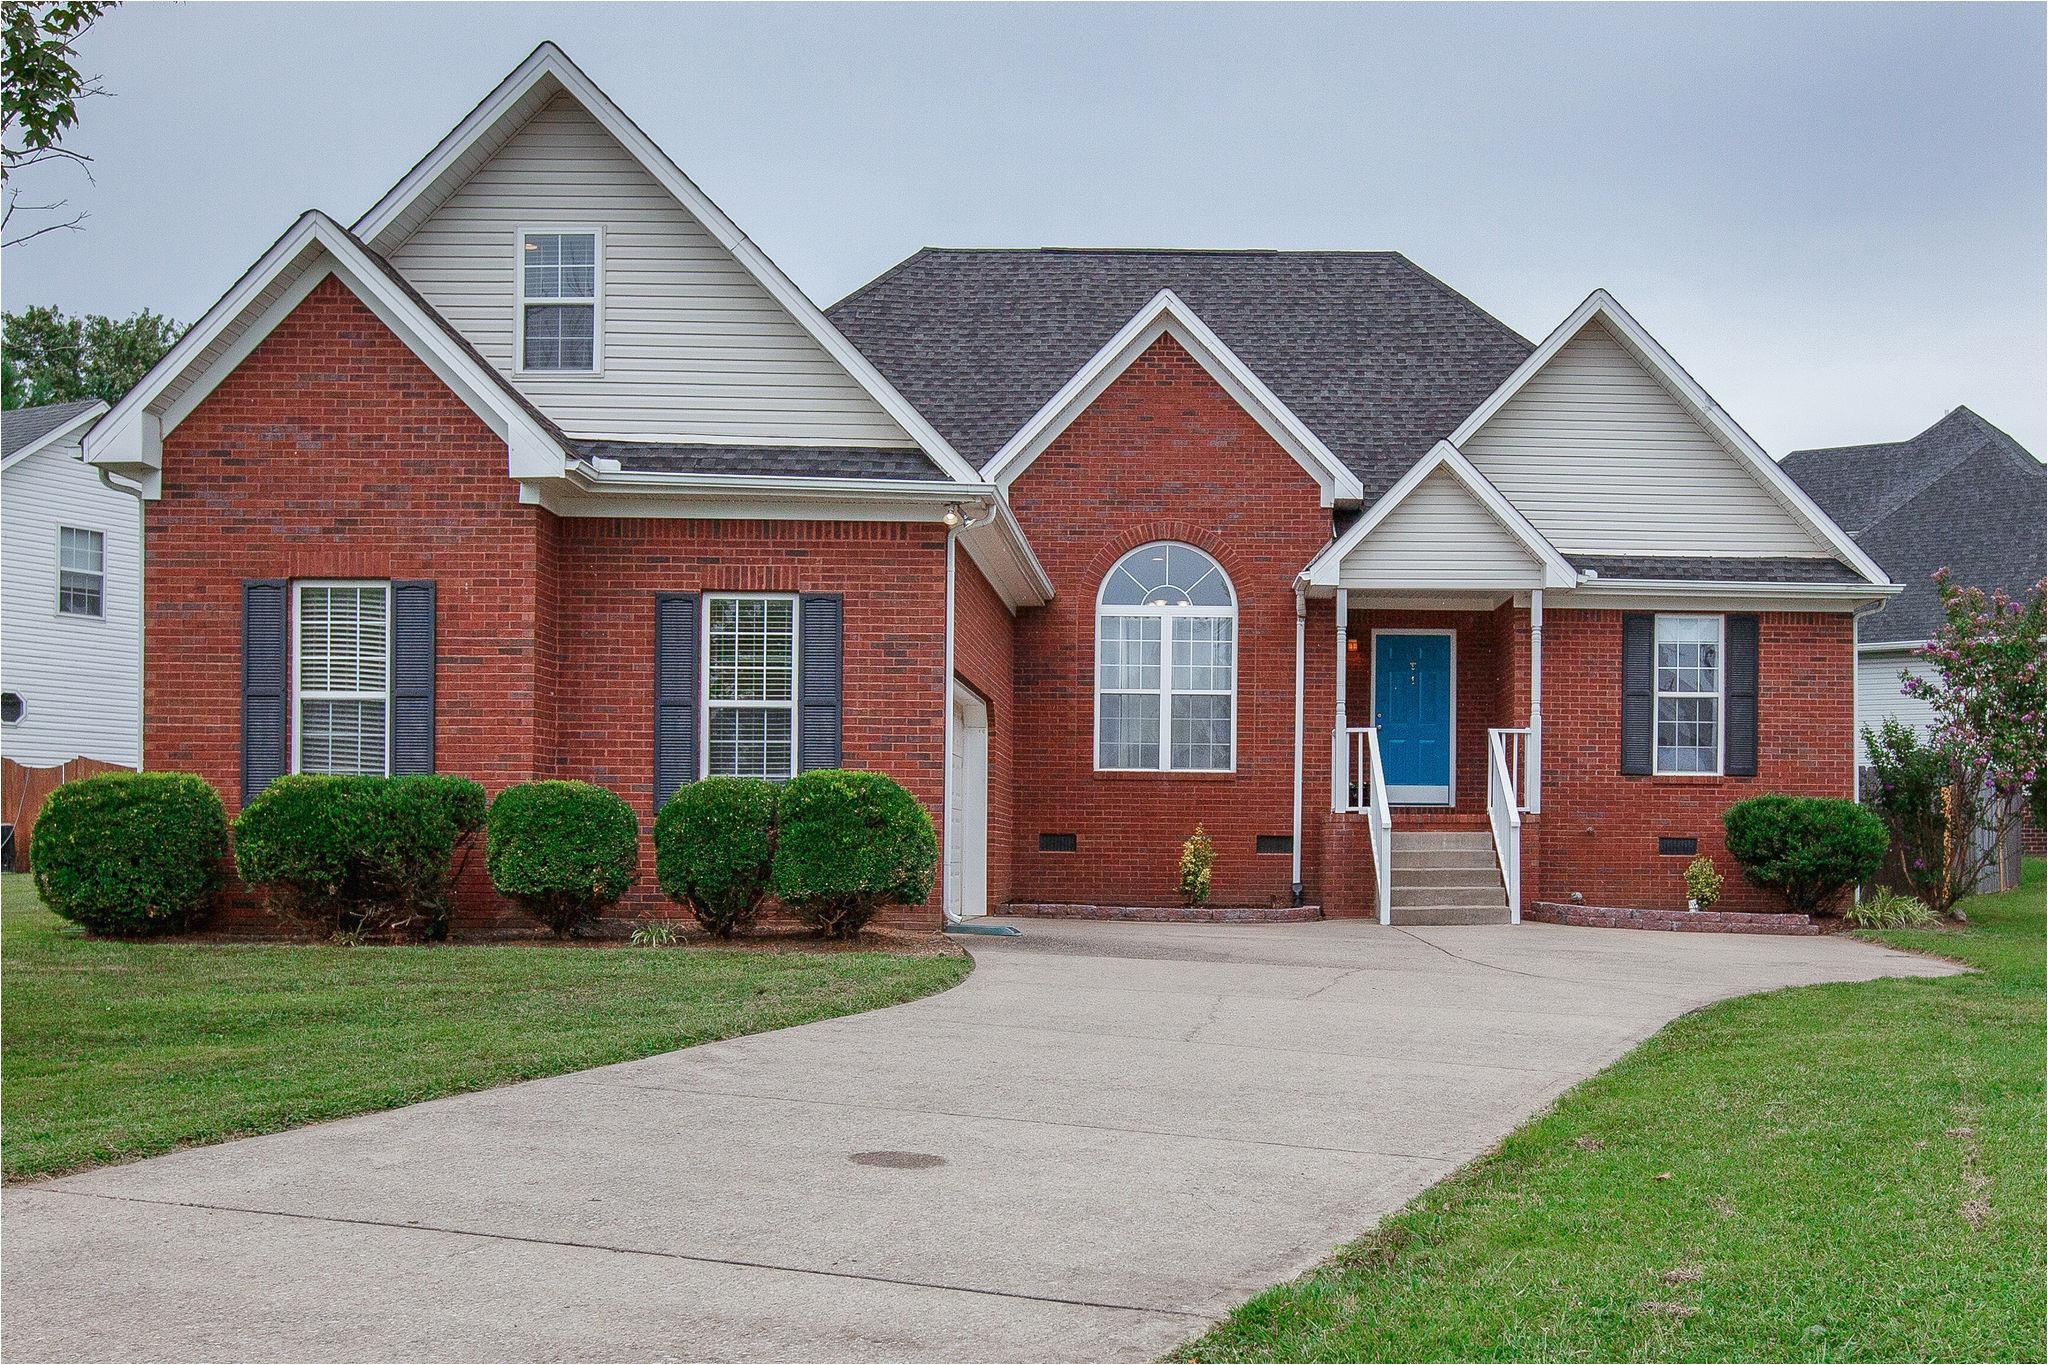 289900 1800 portview dr spring hill tn 37174 pending sale no showings